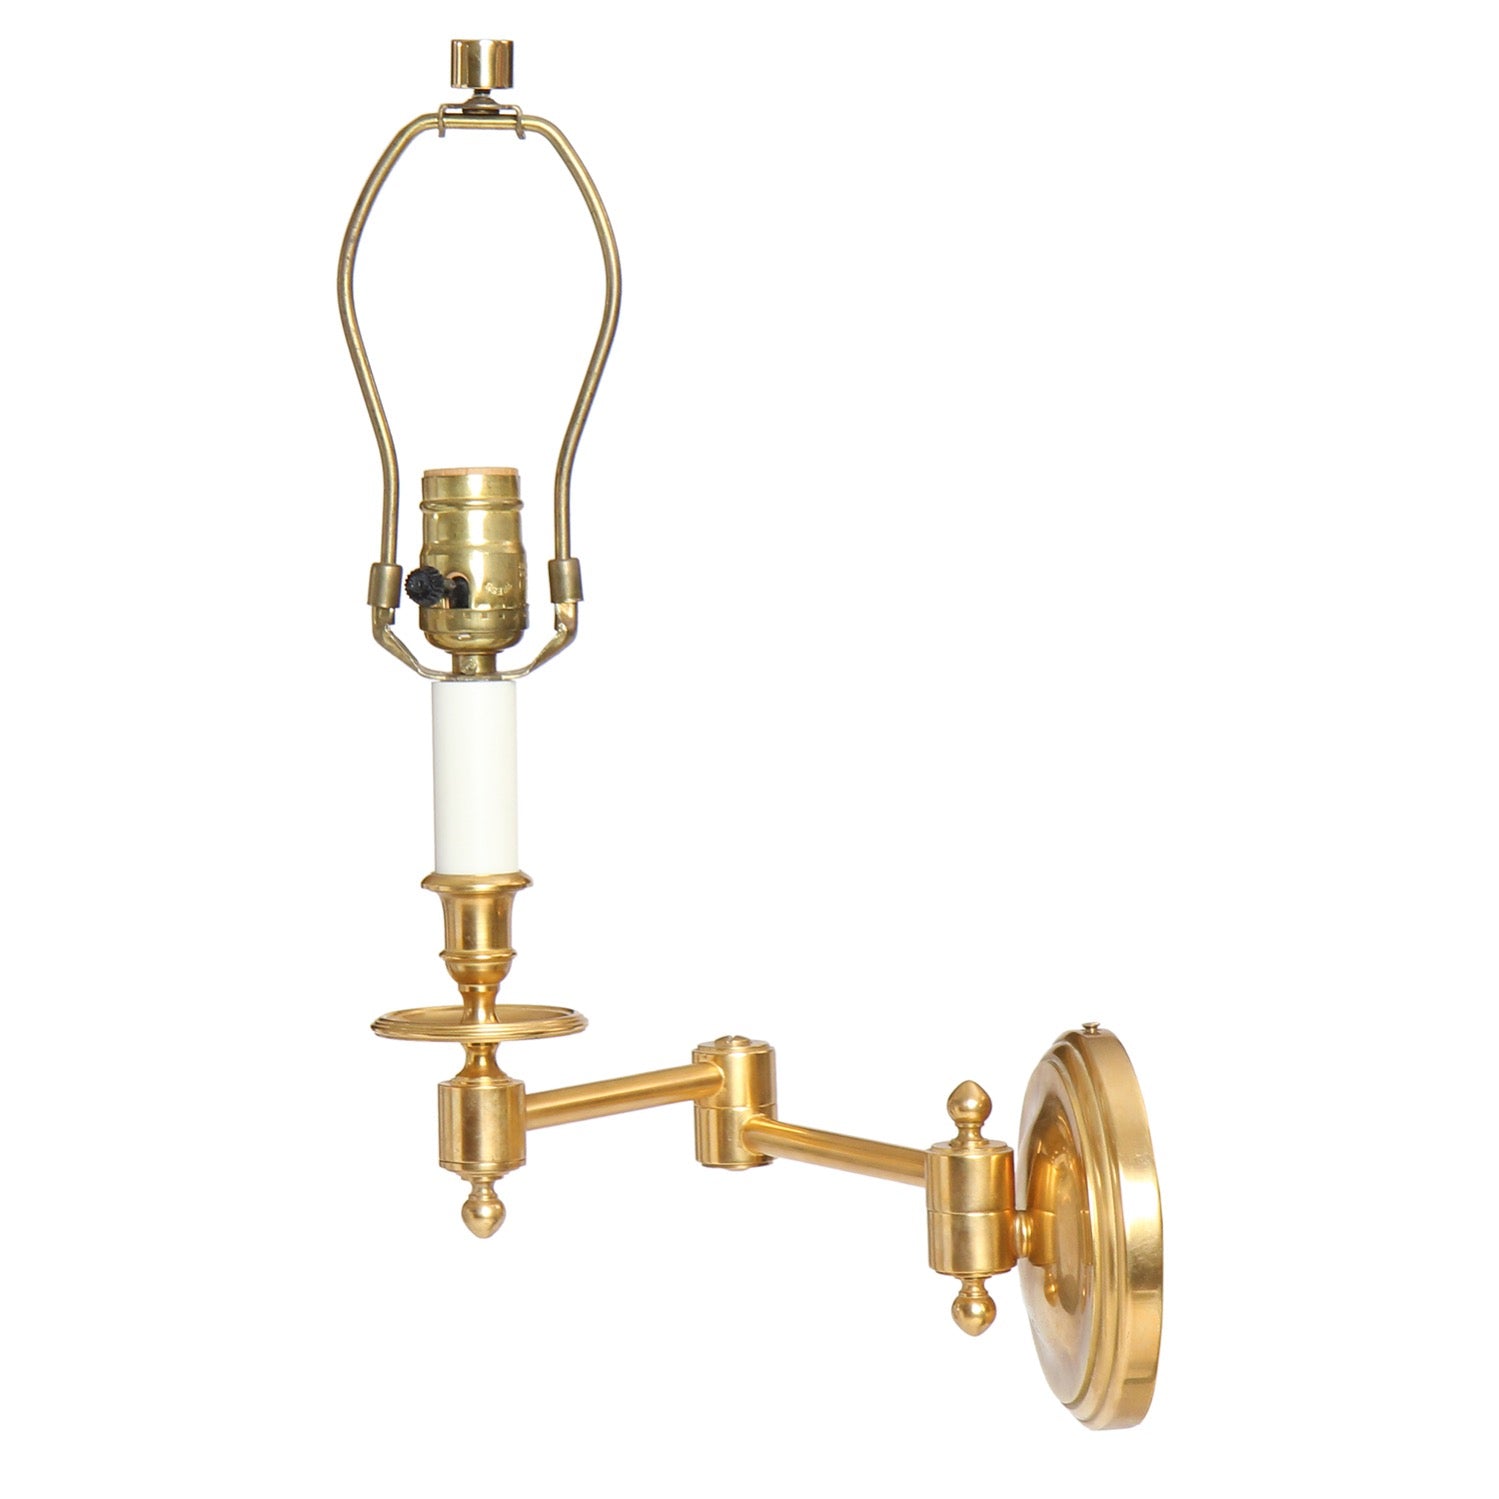 Pair of Brass Swing Arm Wall Lights from USA